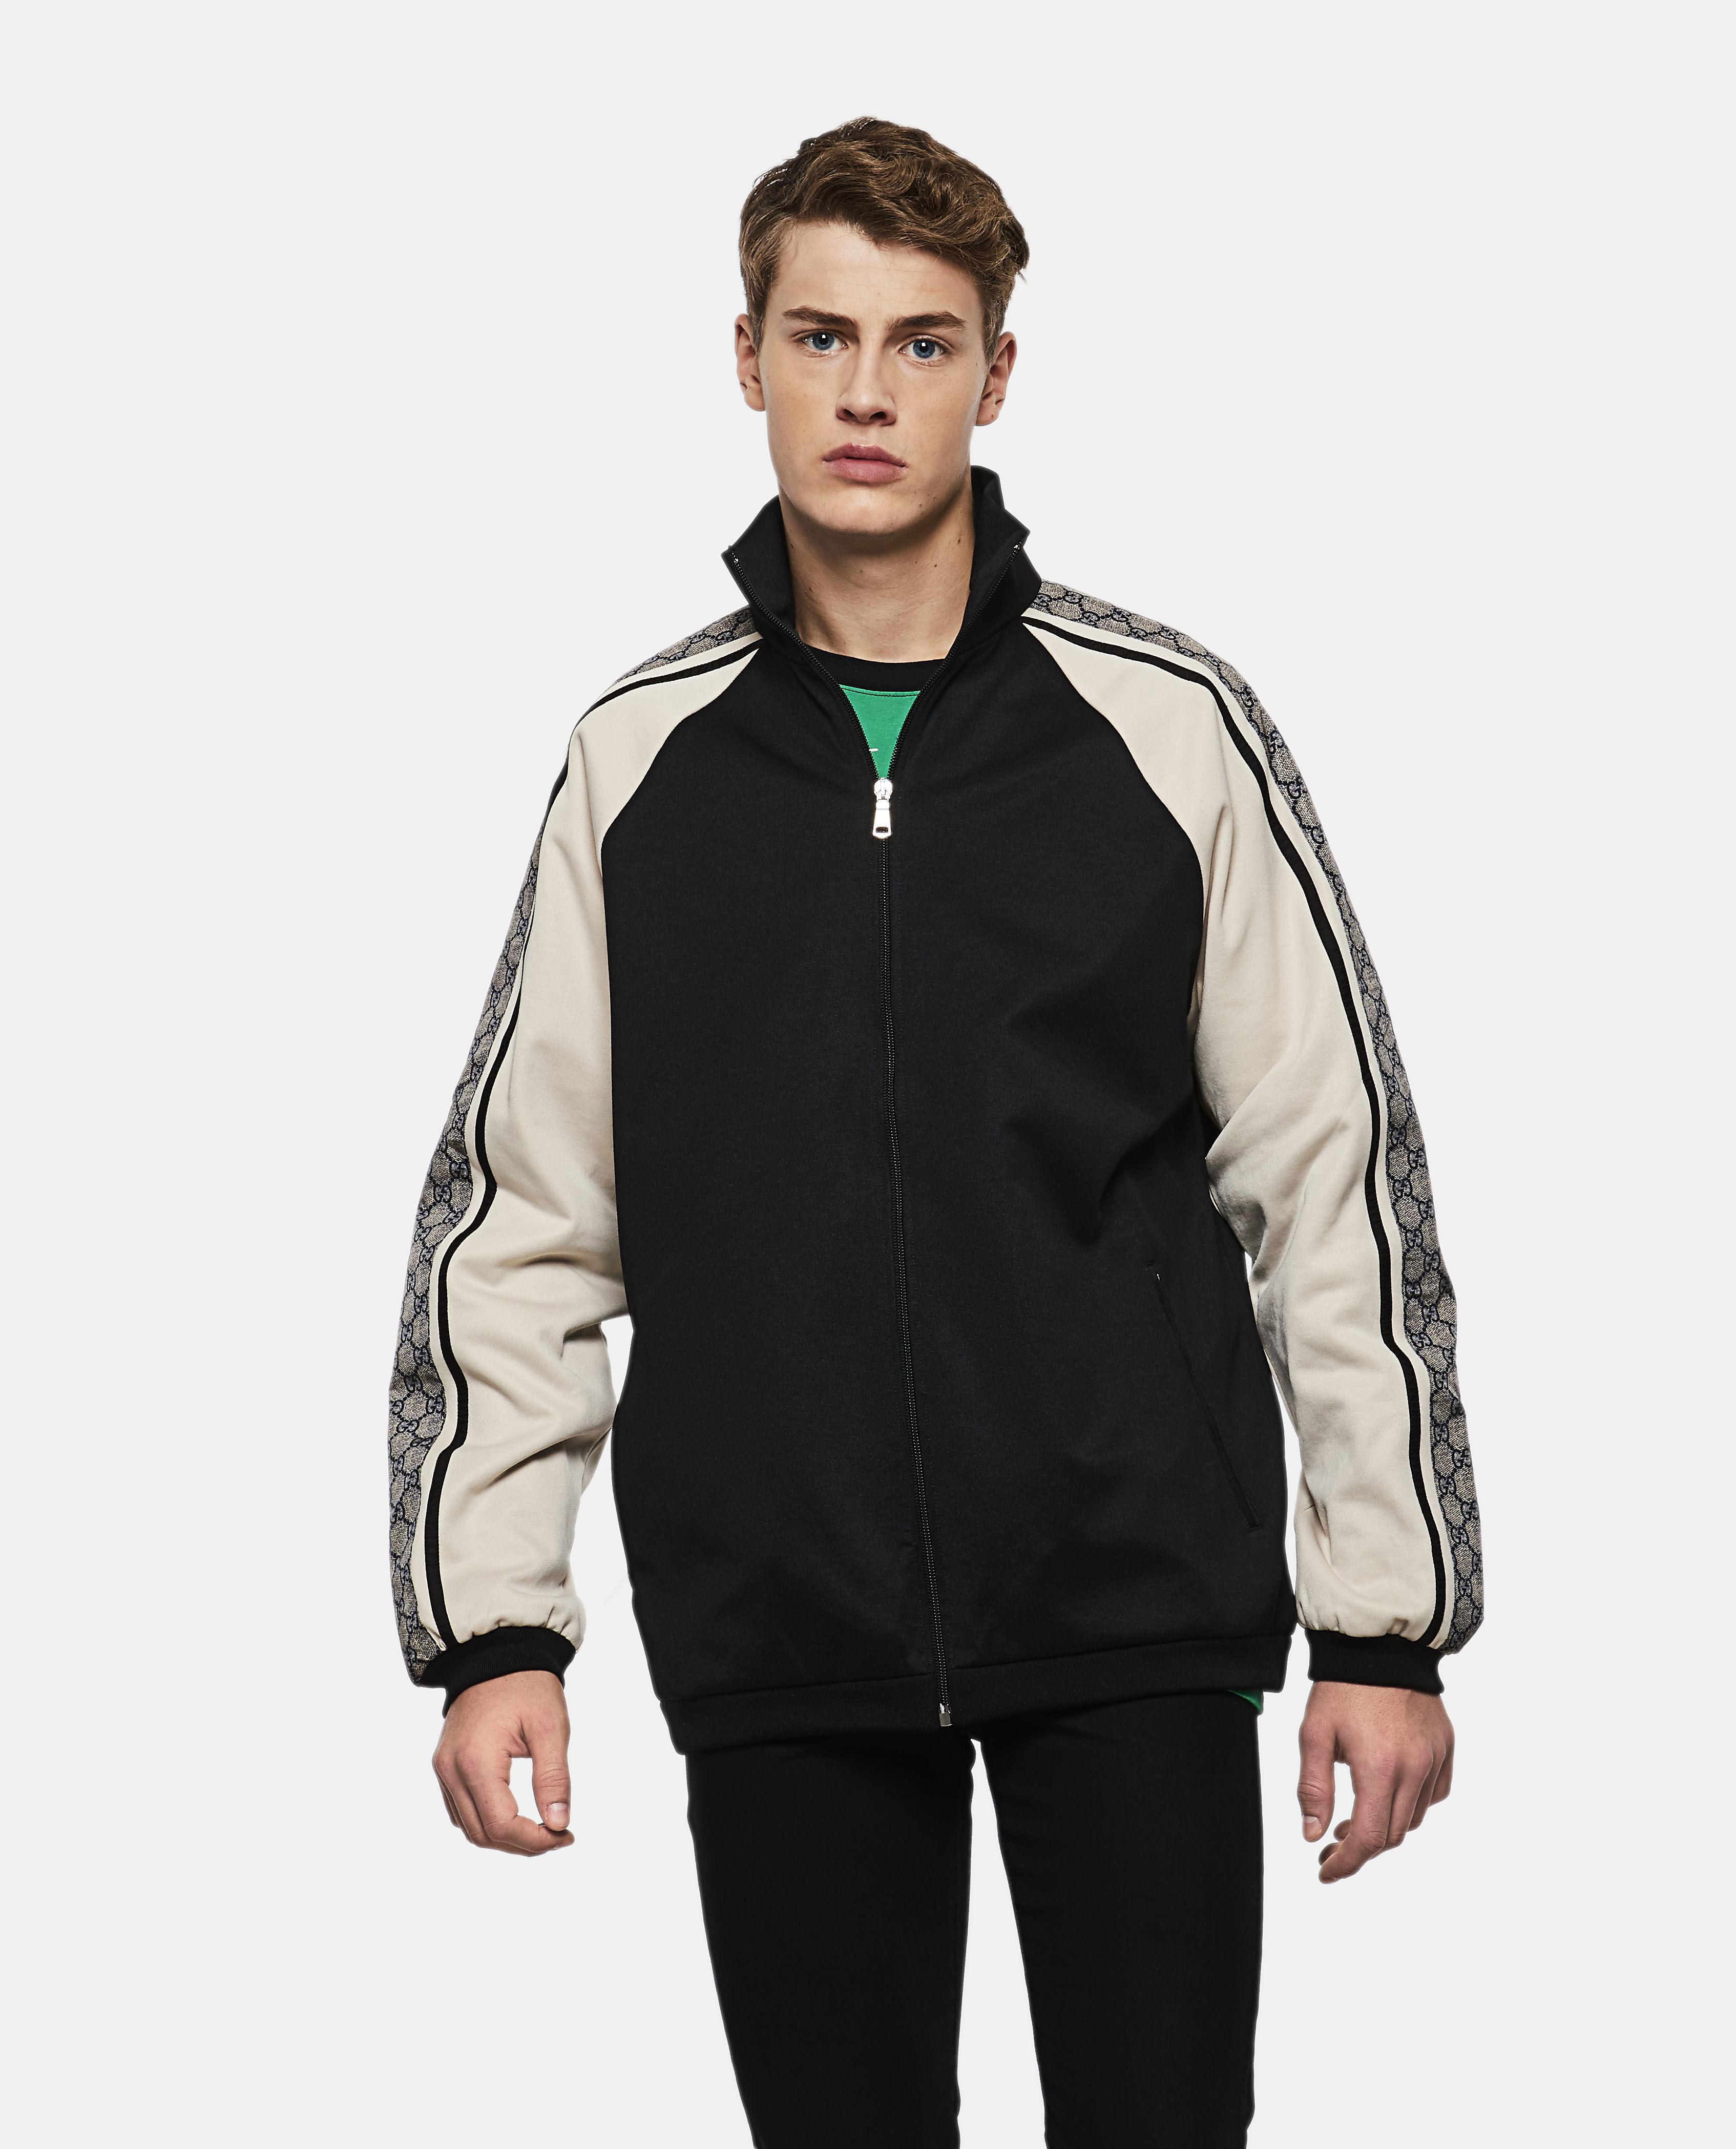 Gucci Synthetic Oversized Technical Jersey Jacket in Black for Men - Save  29% - Lyst